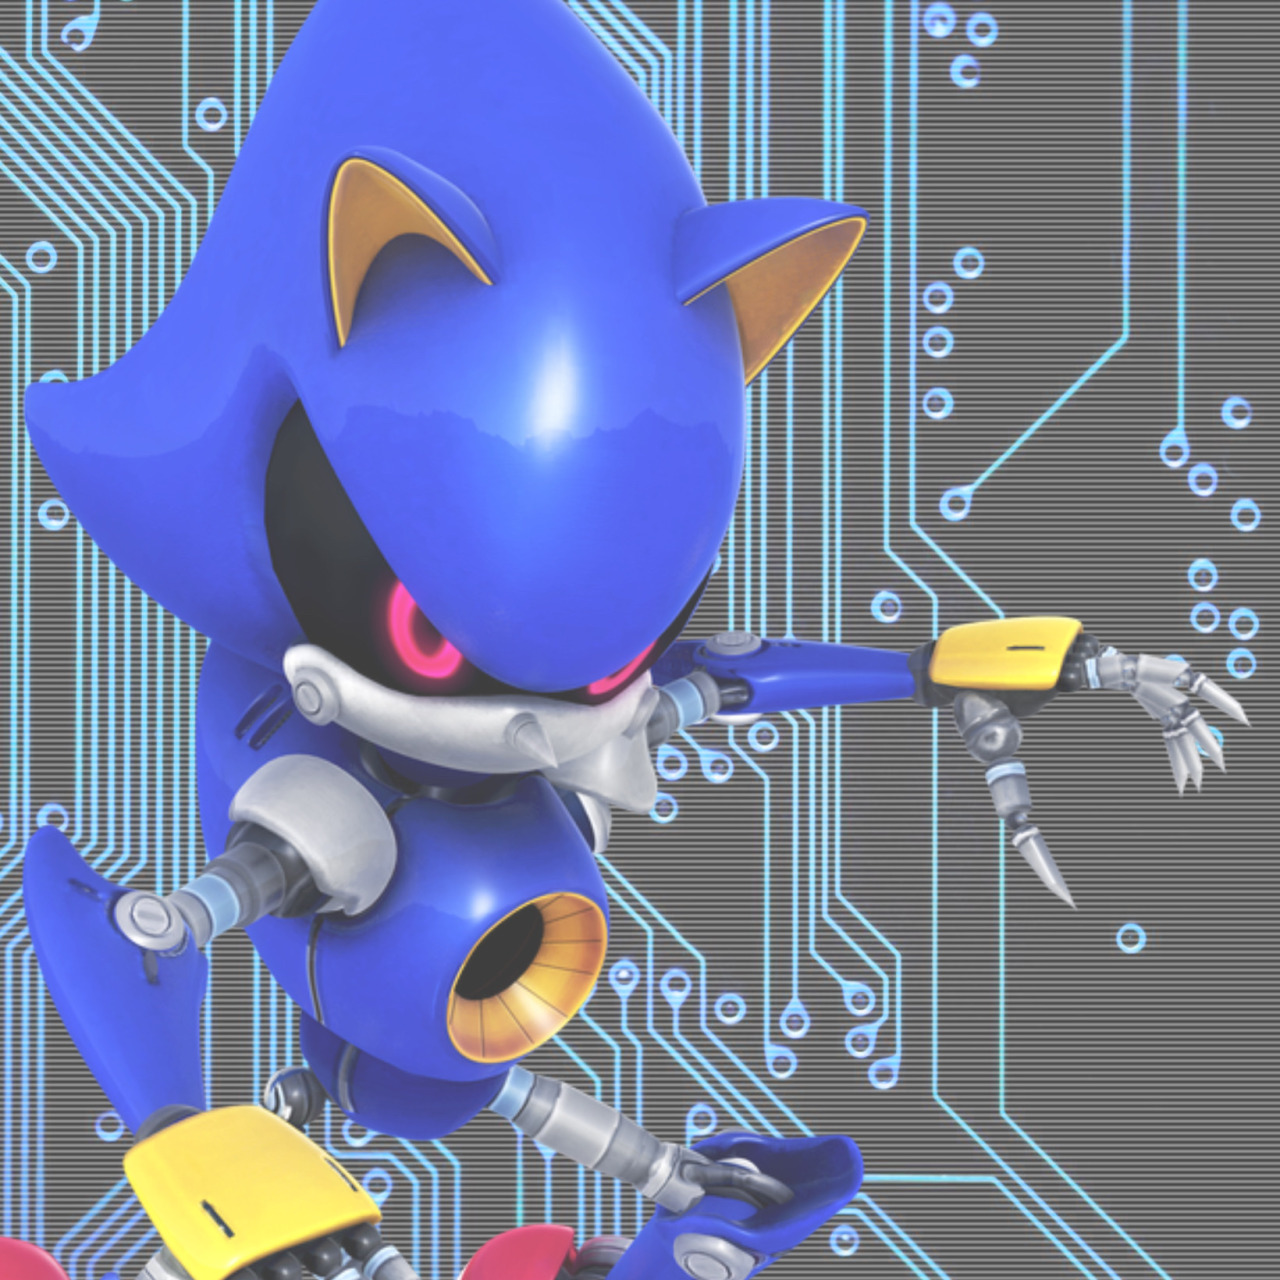 ╰(*´︶`*)╯♡ — I AM HERE ! icons for metal sonic with pastels and